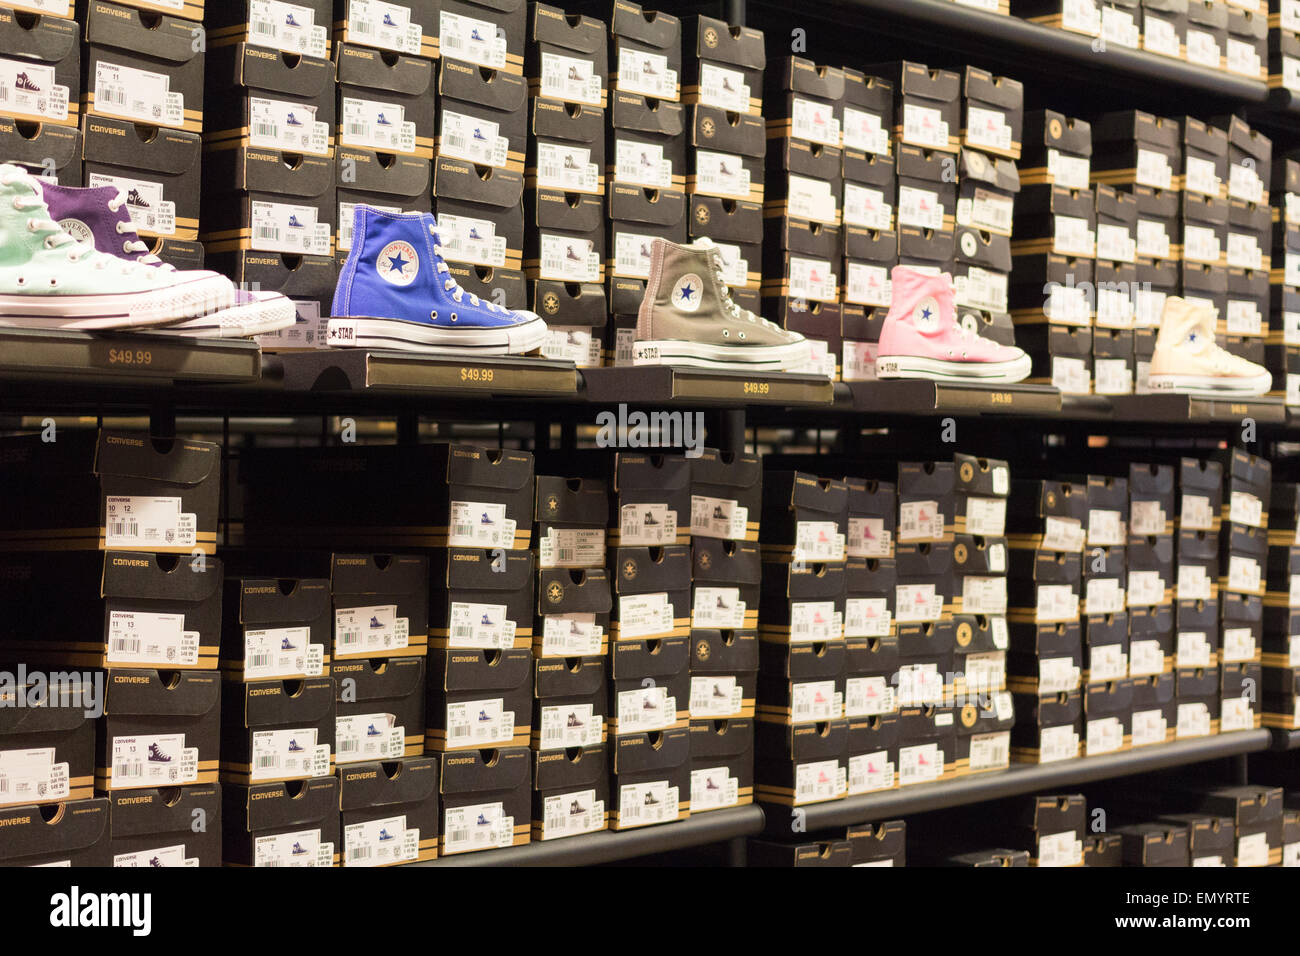 Converse shoe shop in a shopping mall in Florida Stock Photo - Alamy